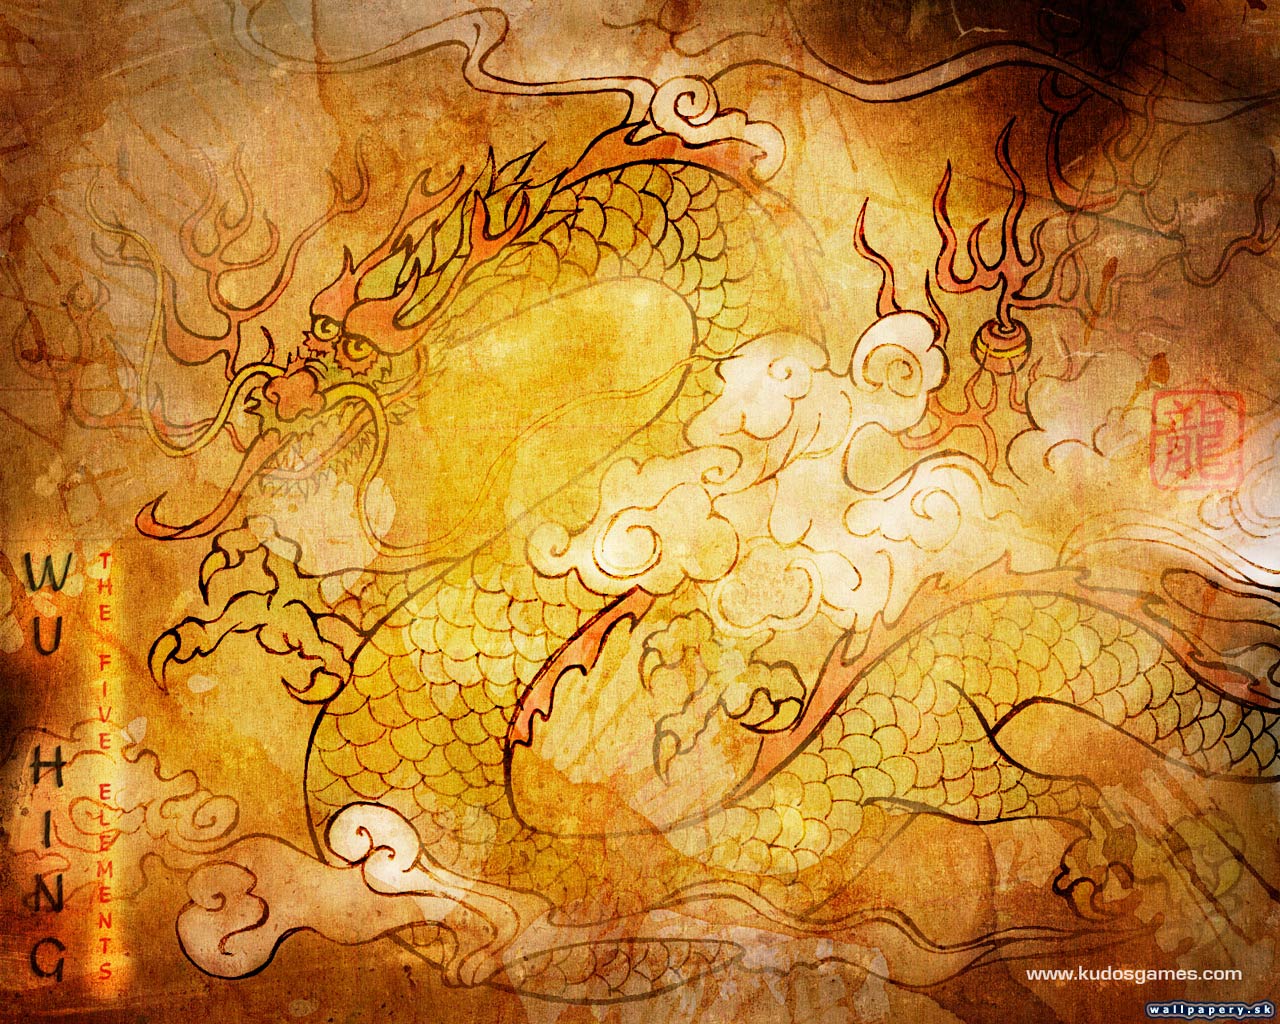 Wu Hing: The Five Elements - wallpaper 3